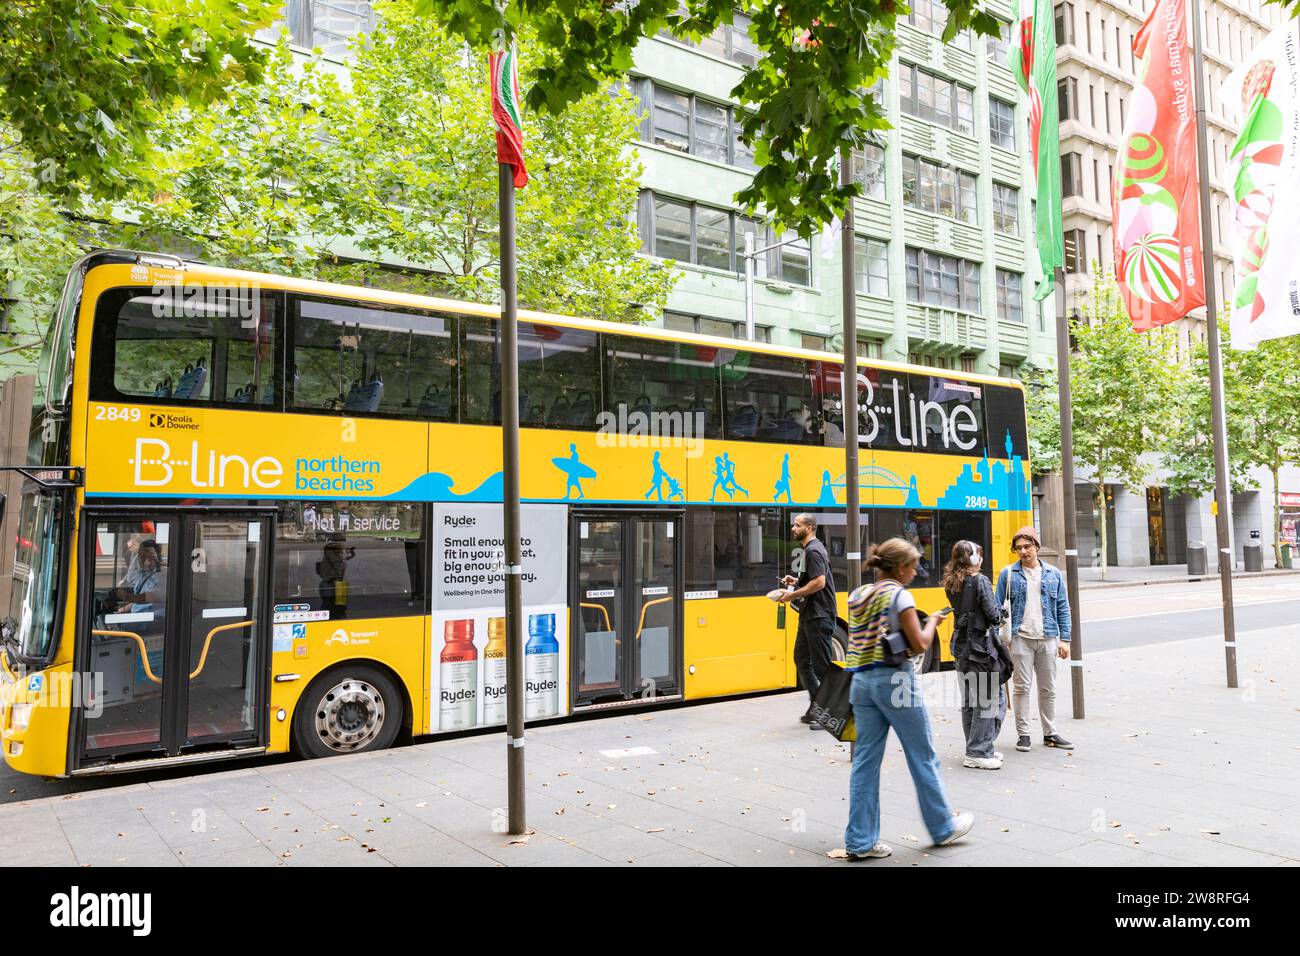 Sydney Australia B Line yellow double decker bus at a stop in York street Sydney,NSW,Australia with christmas banners flying Stock Photo